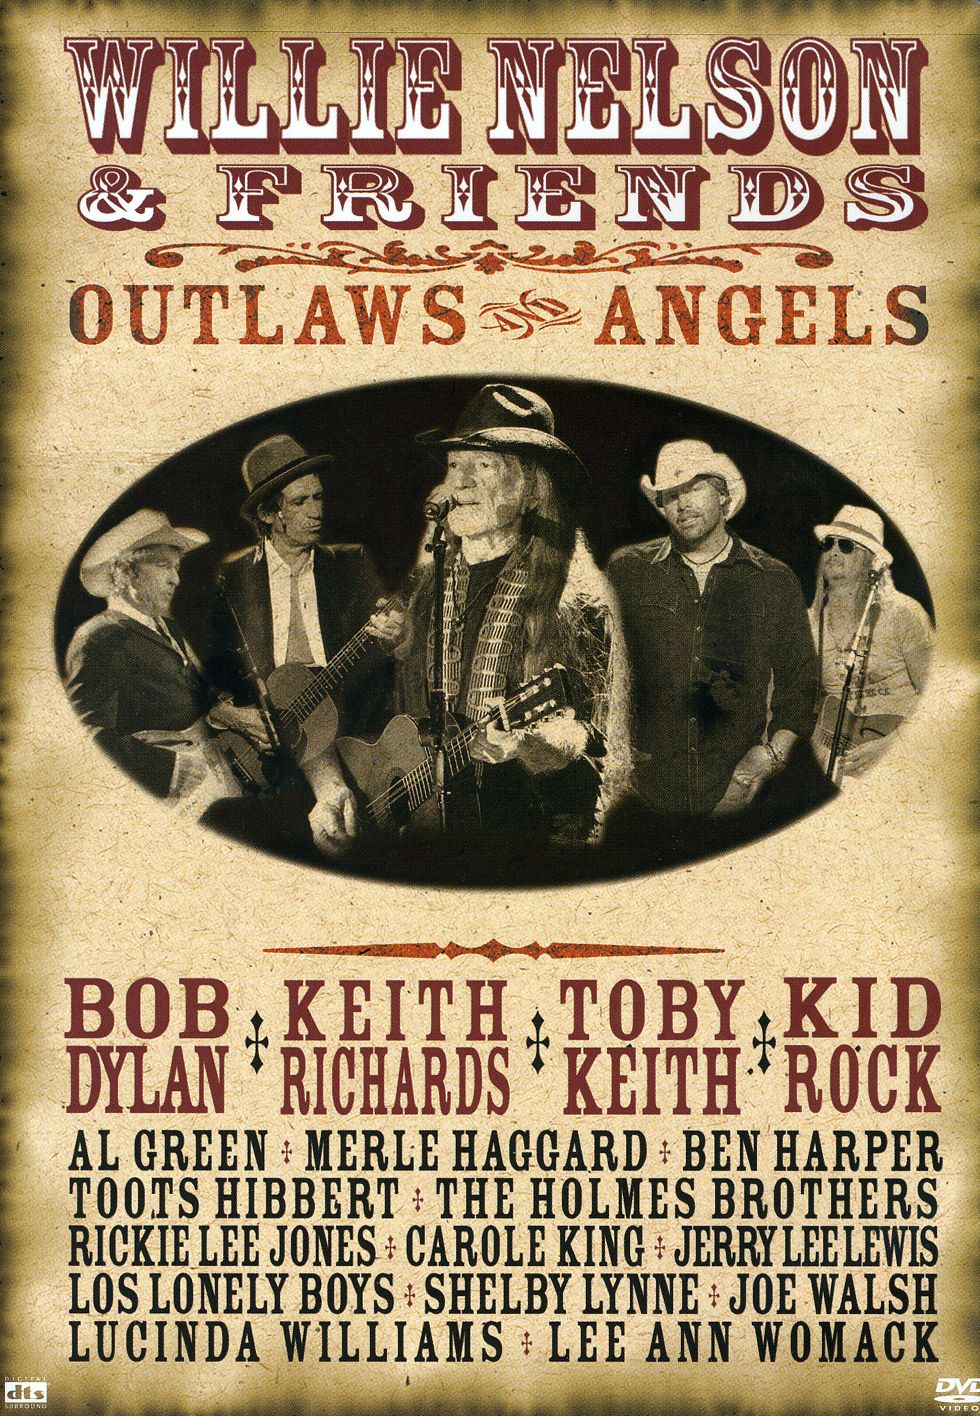 WILLIE NELSON & FRIENDS OUTLAWS & ANGELS / (DOL)